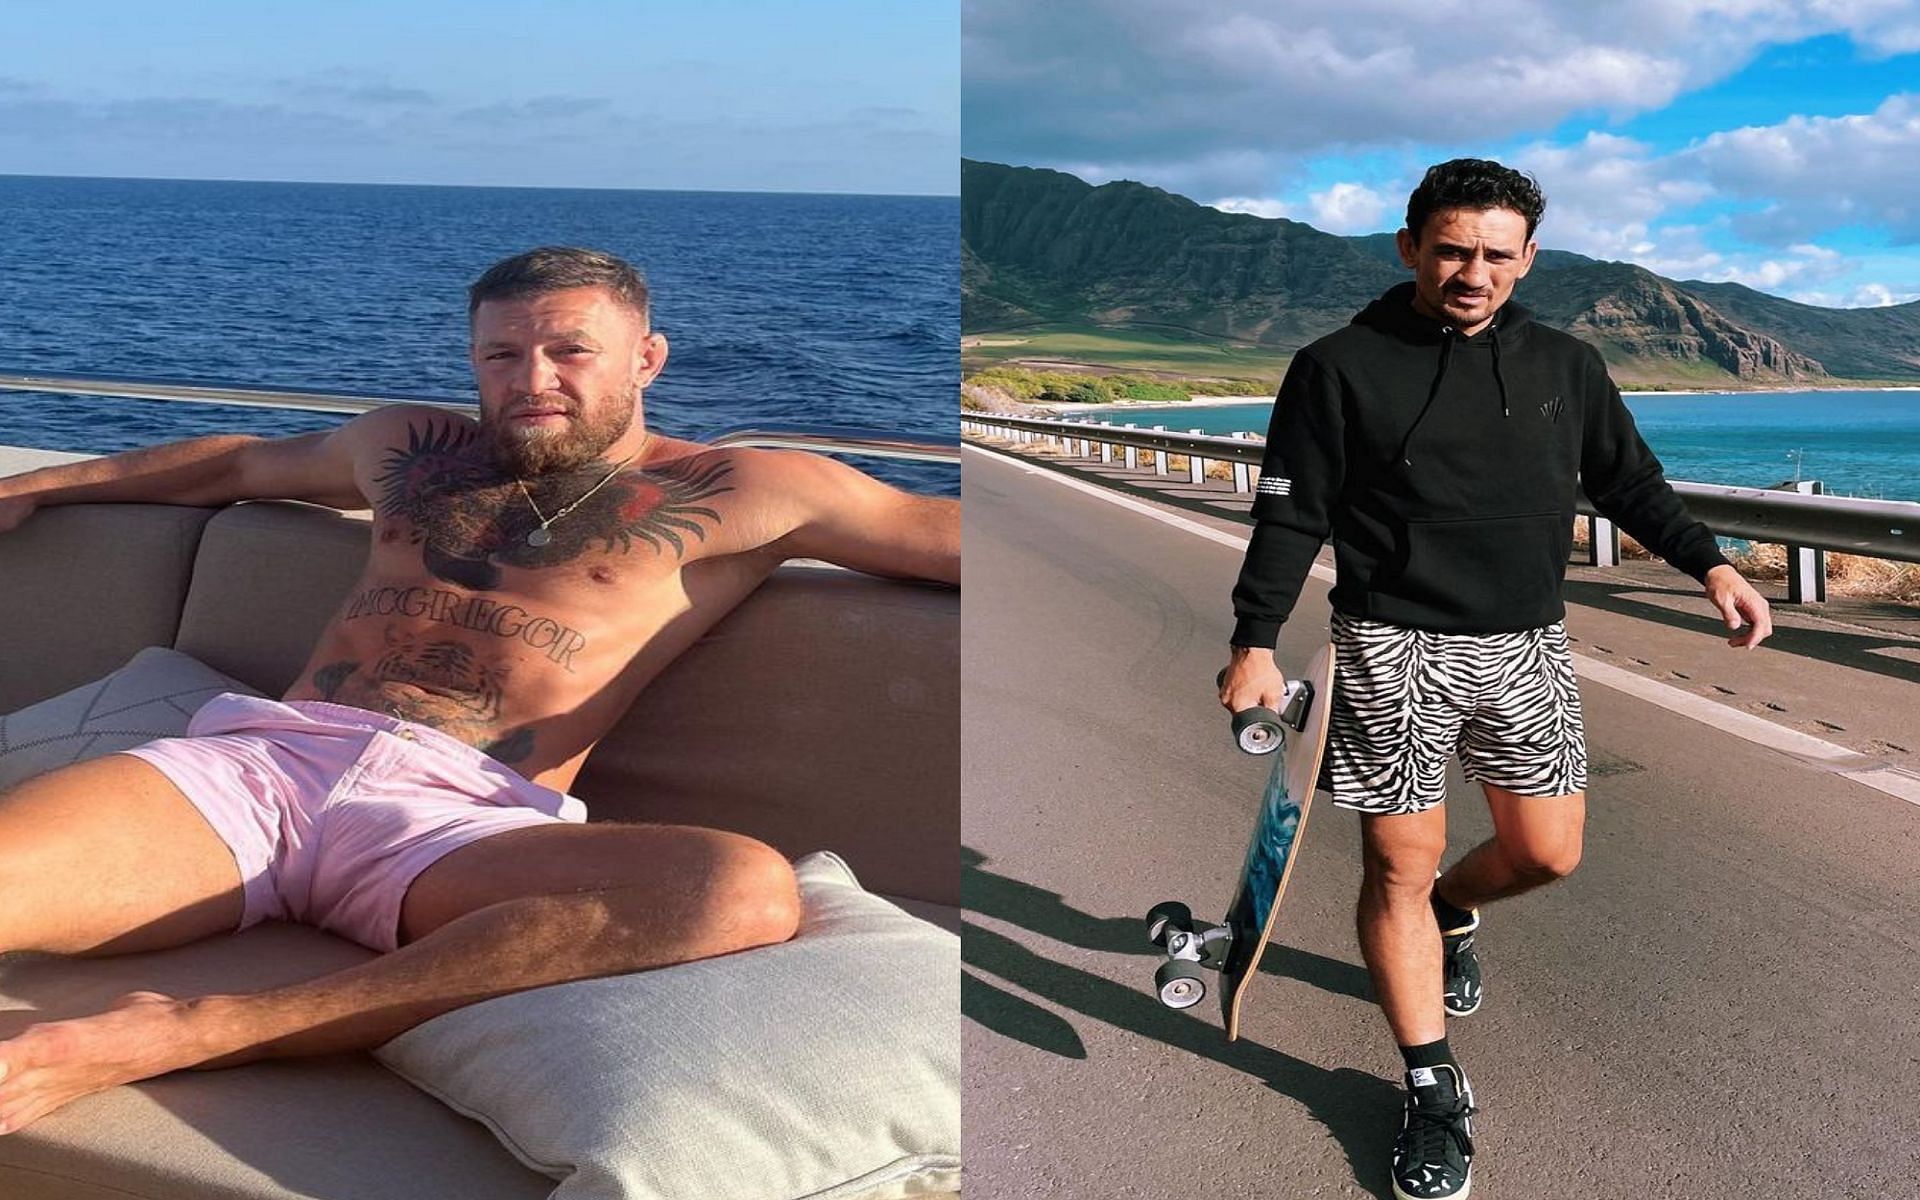 Conor McGregor enjoying time off (left) and Max Holloway skateboarding (right) (Credits Instagram: @thenotoriousmma and @blessedmma)